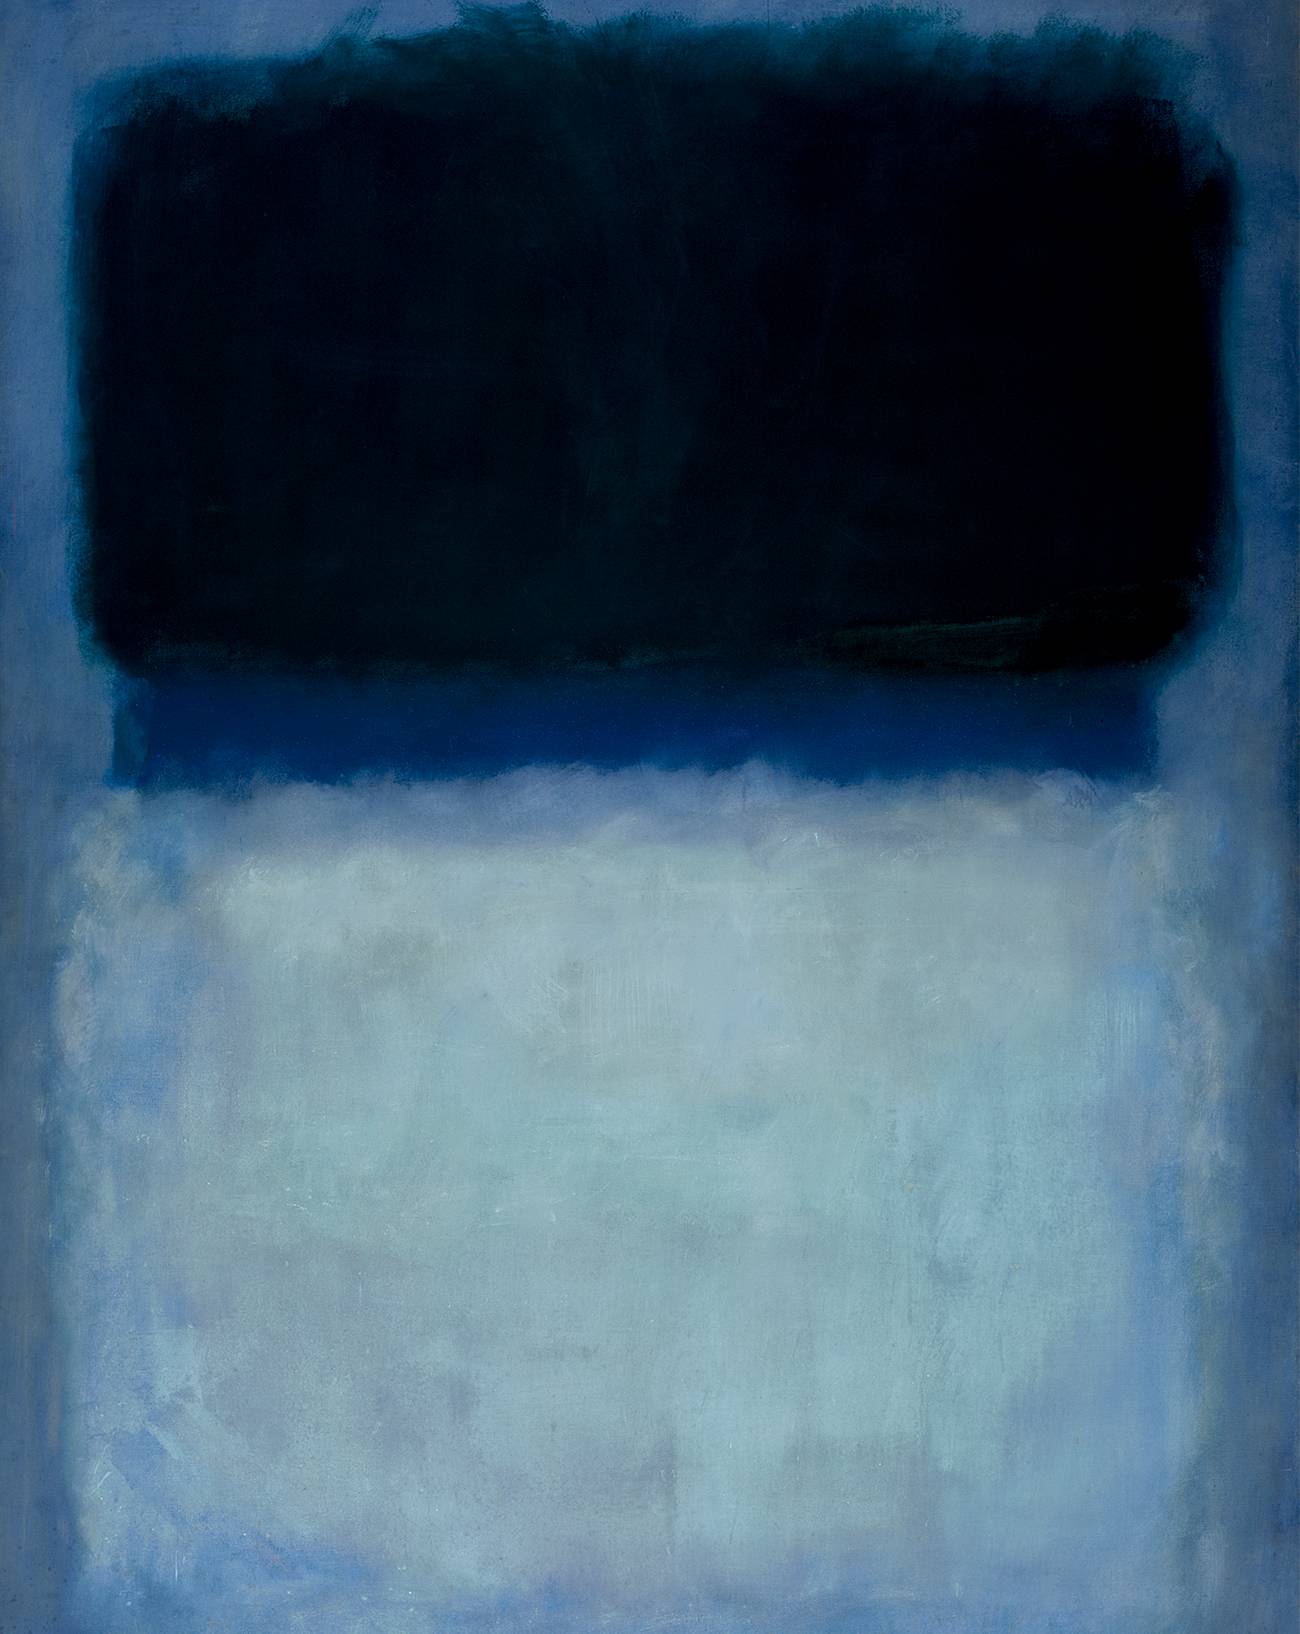 Mark Rothko's many sides and secrets unveiled at Fondation Louis Vuitton